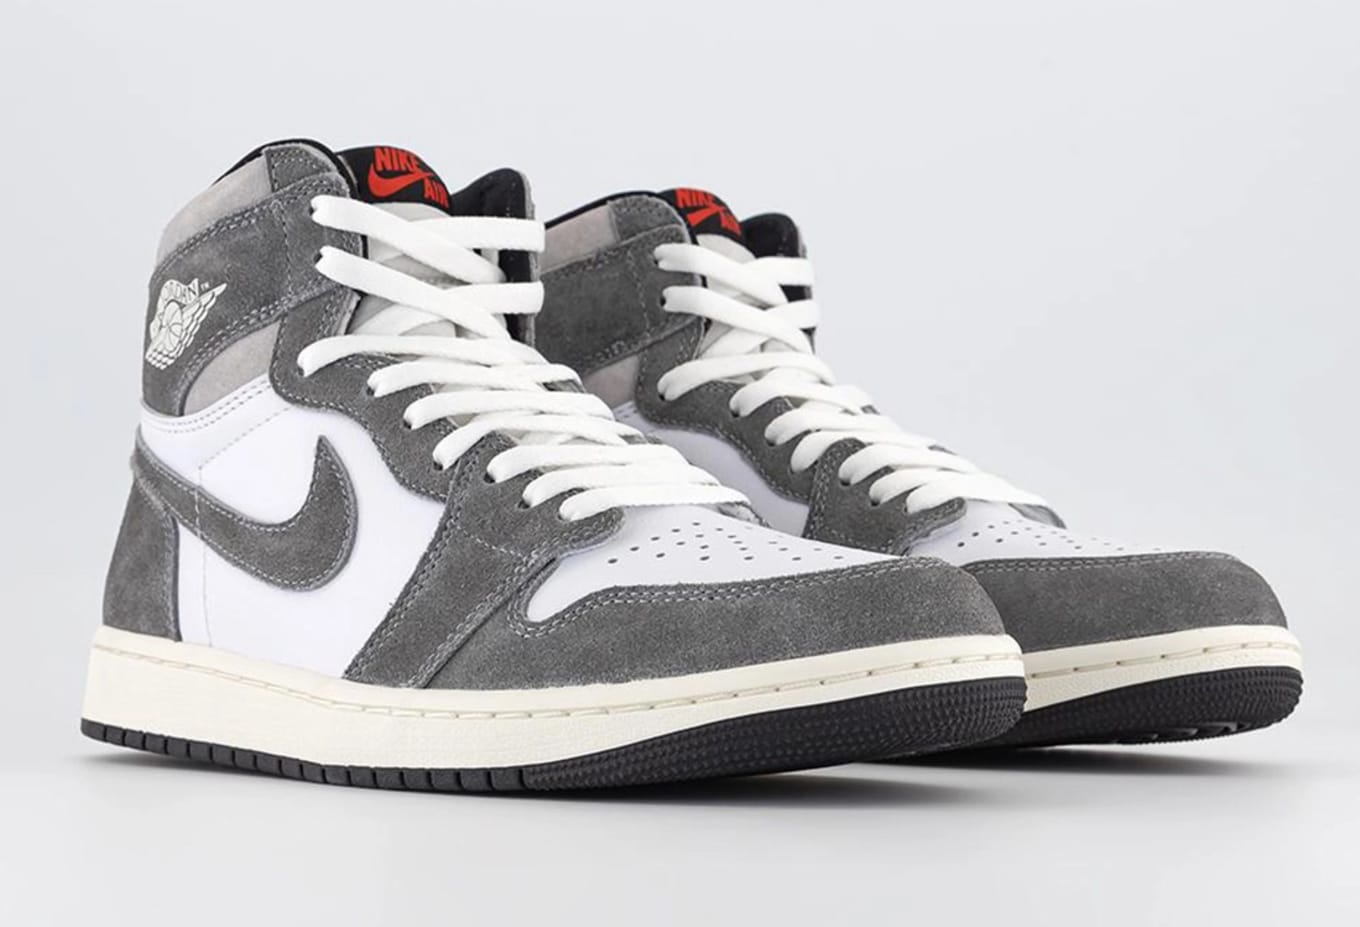 Air Jordan 1 High Retro Washed Heritage Release Date | Sole Collector